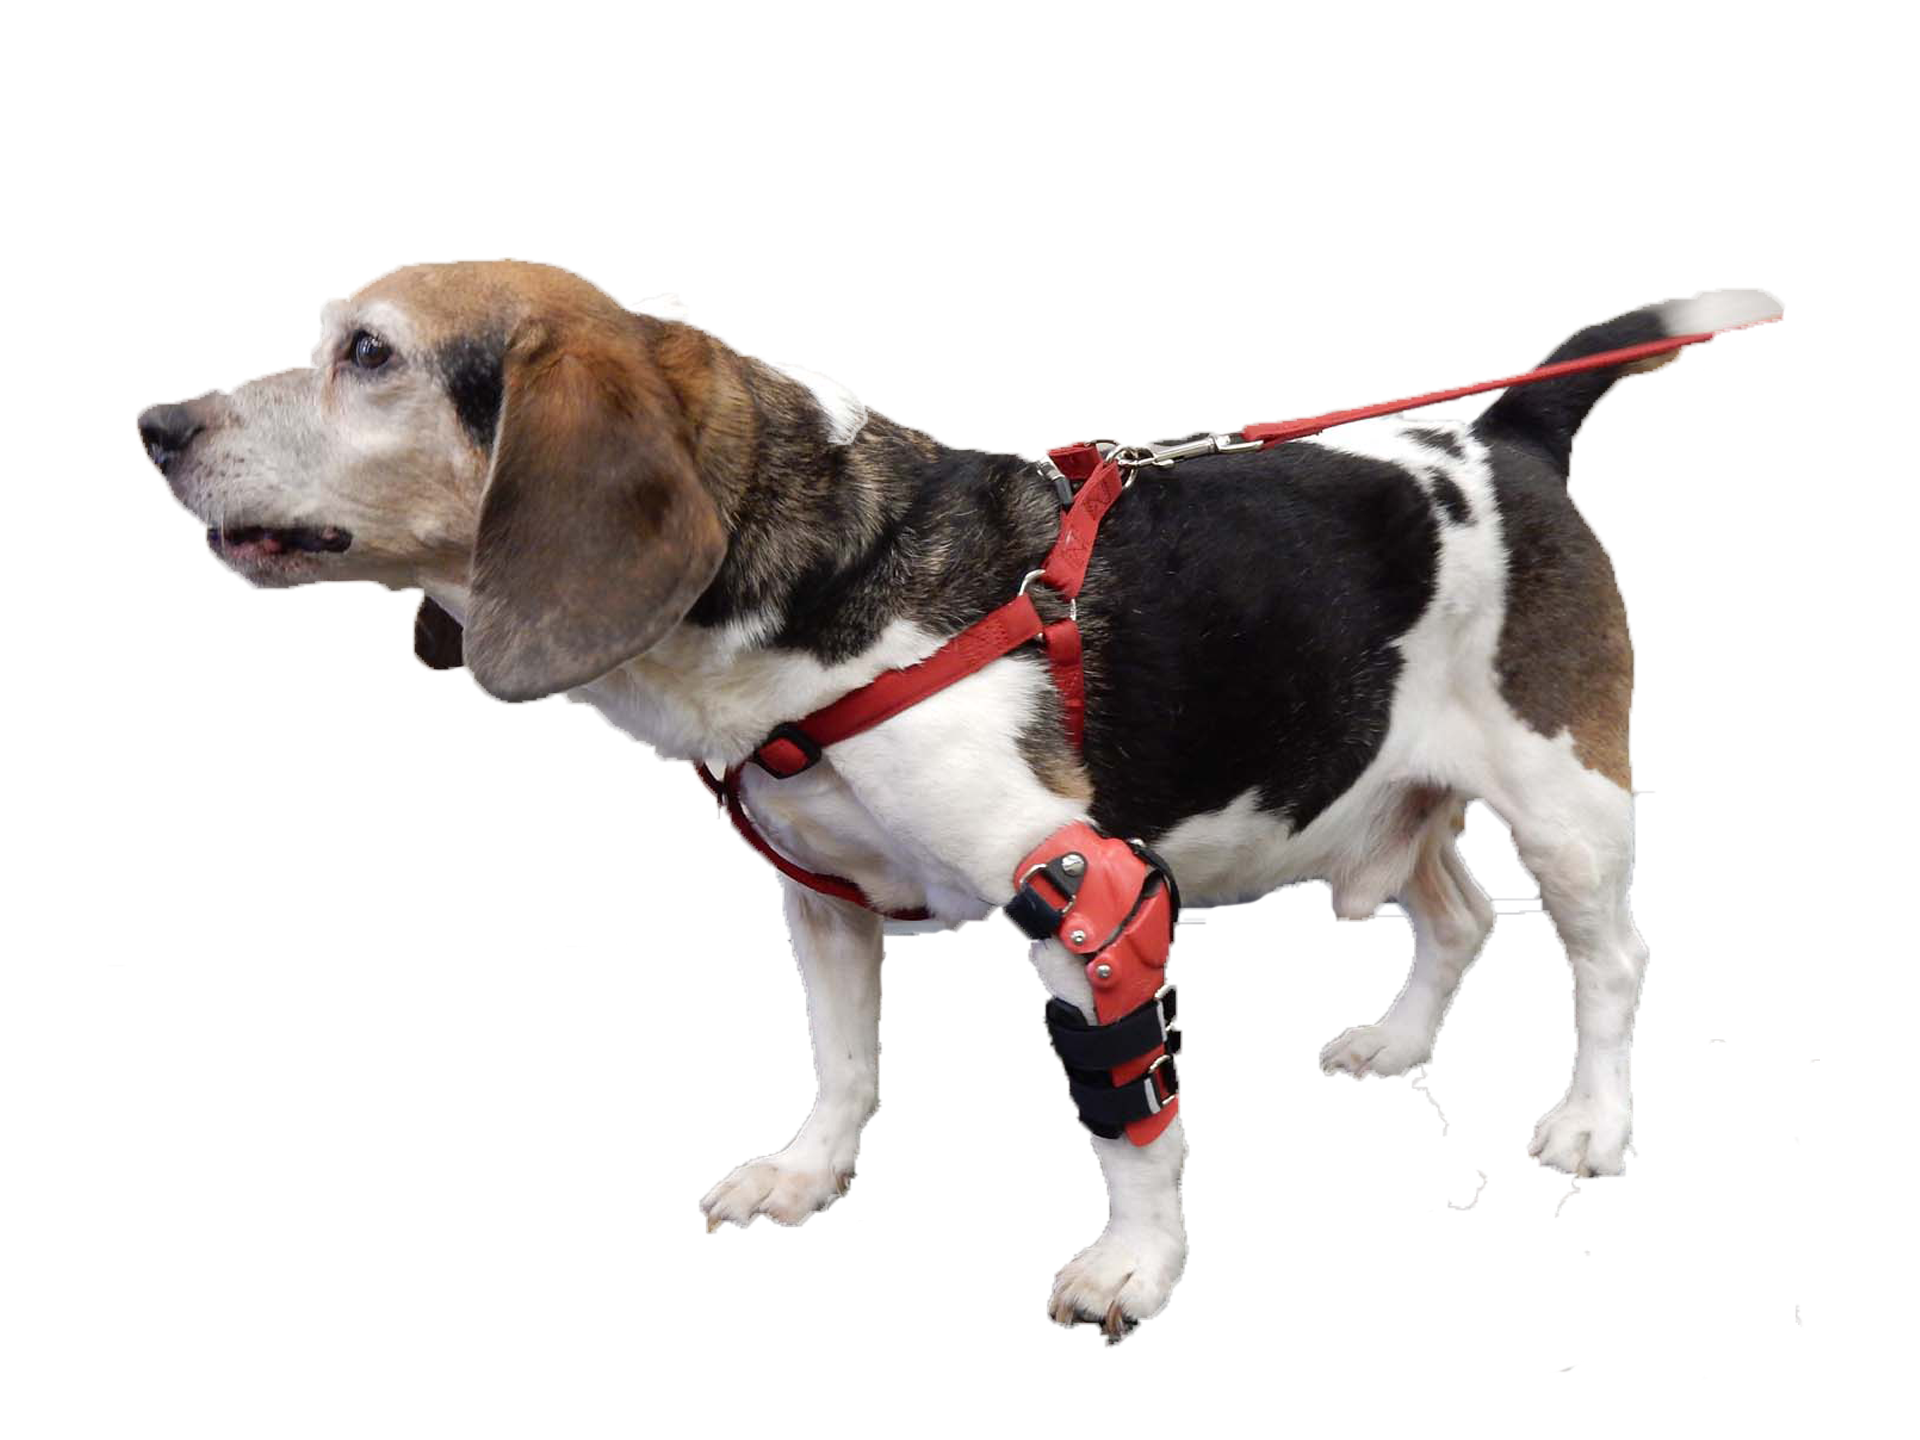 A beagle wearing a red elbow brace